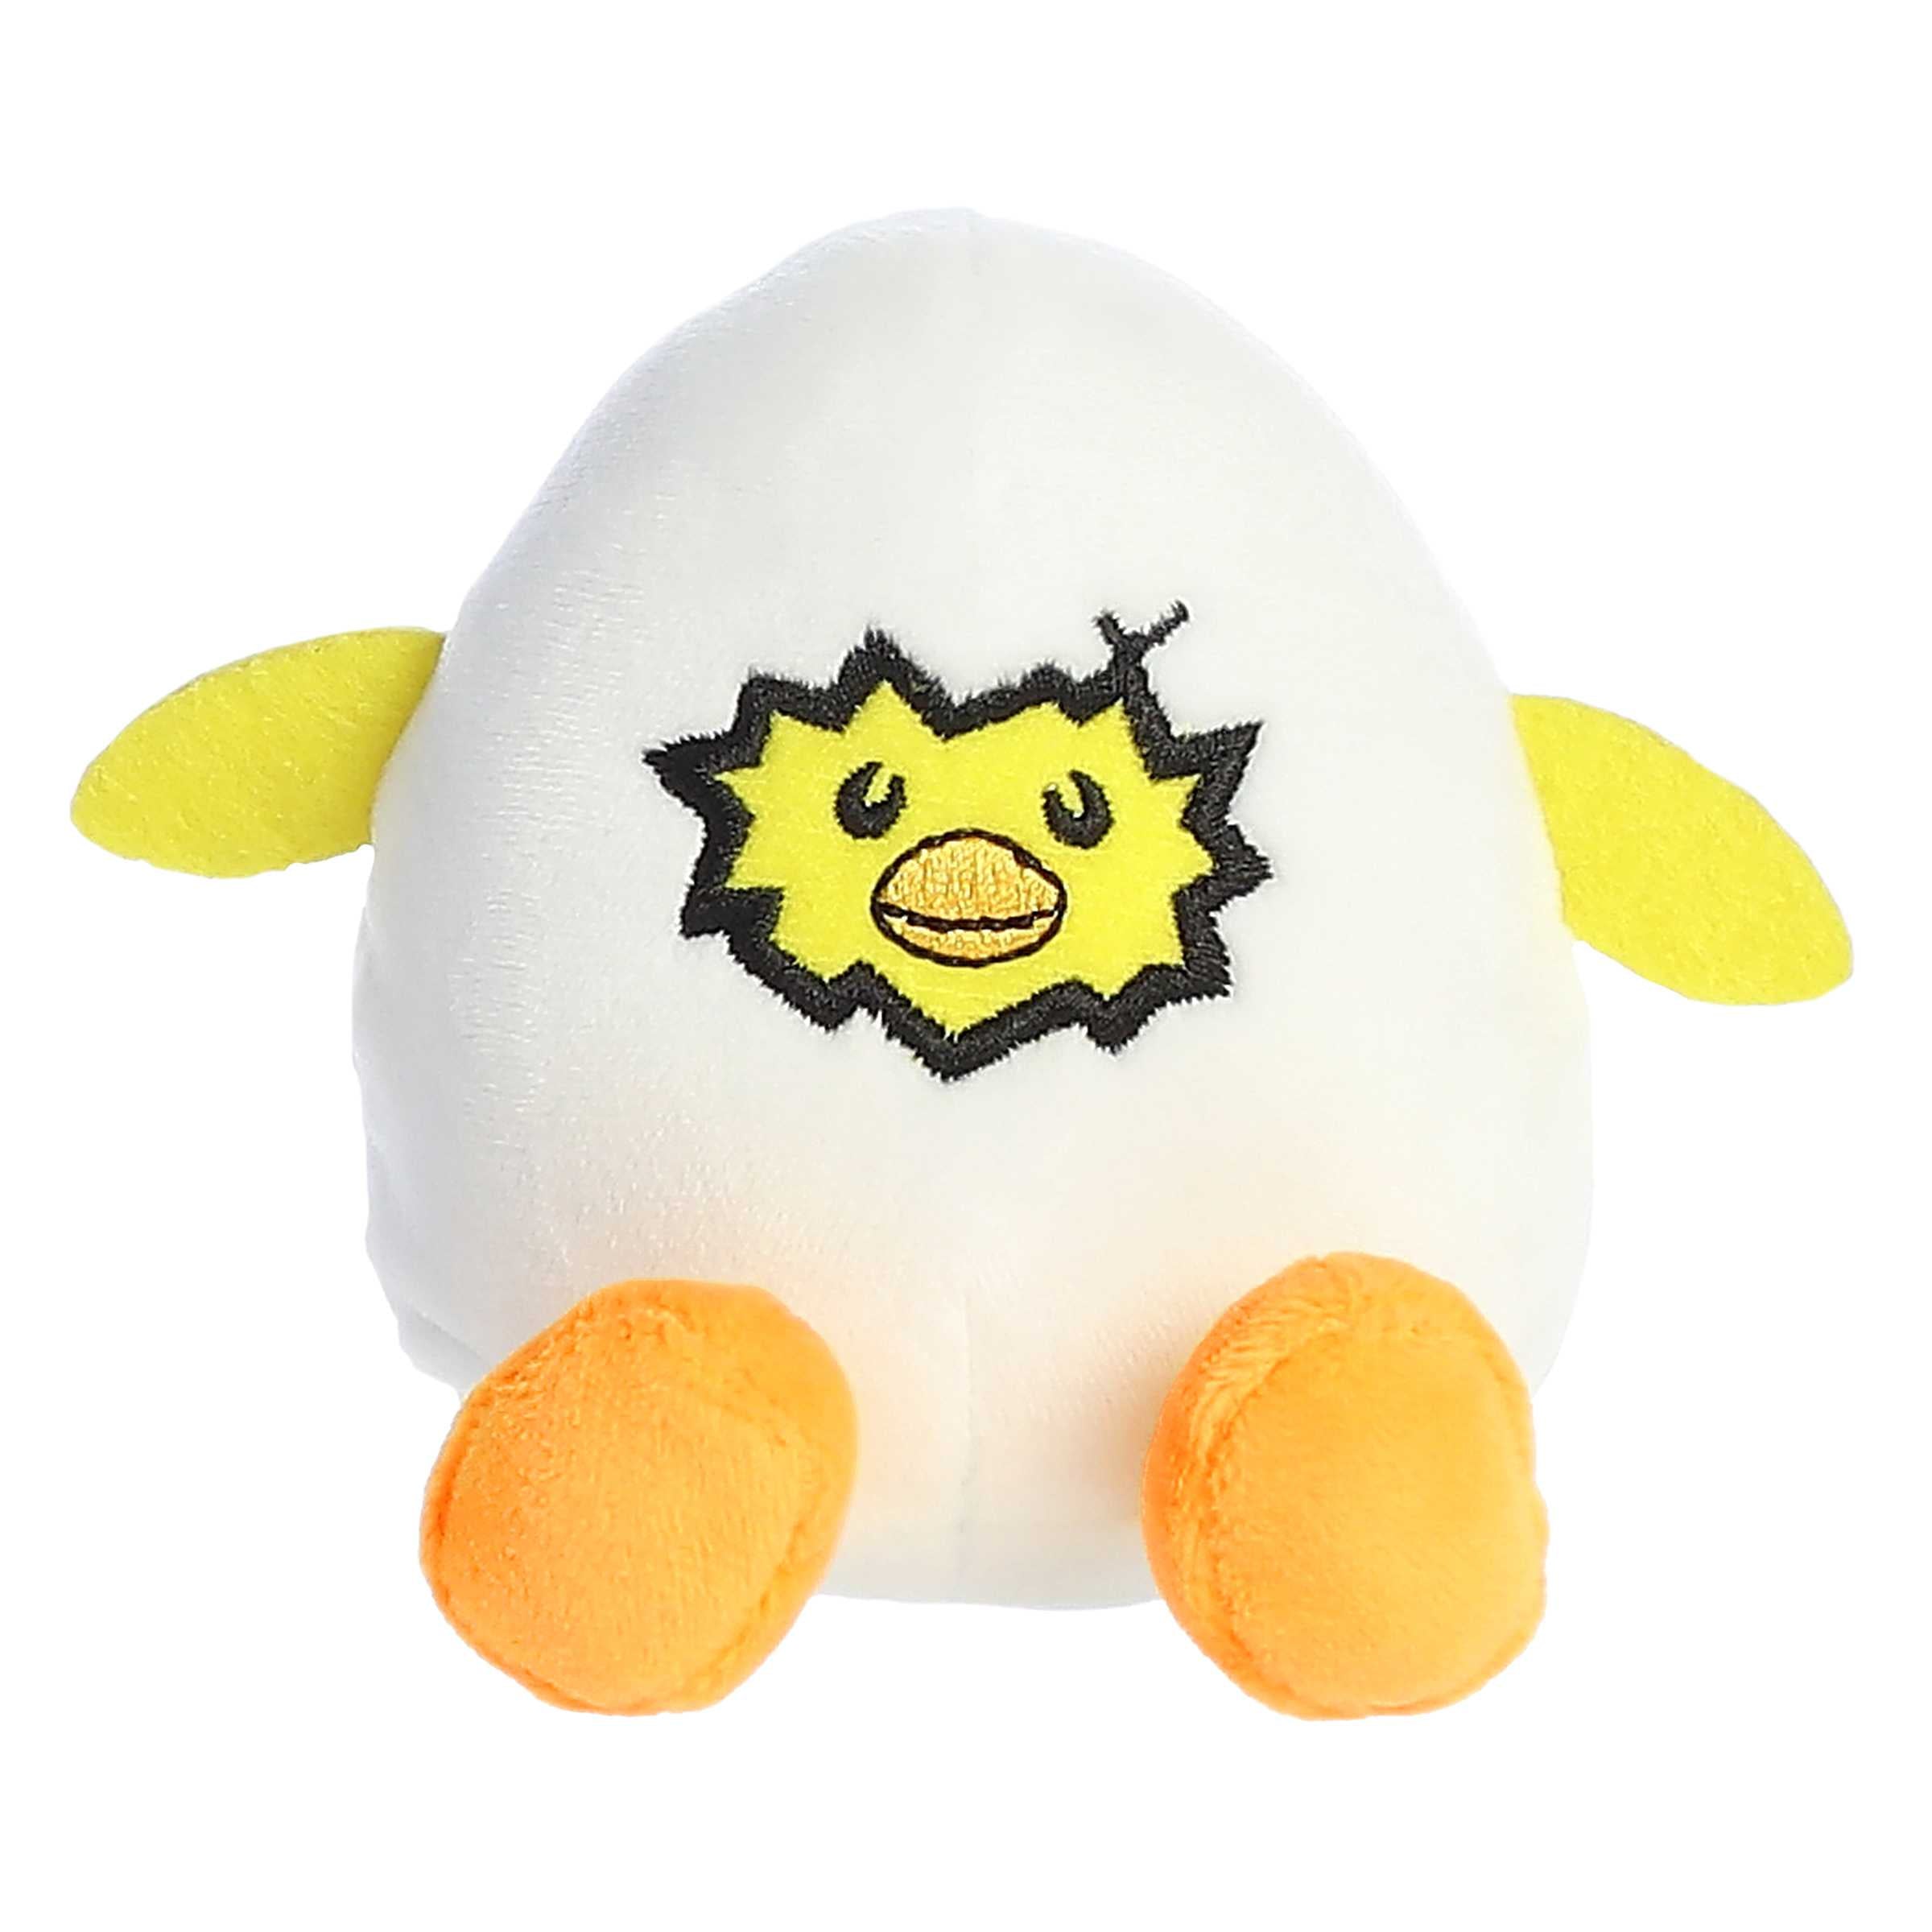 Crack Me Up egg plush by Aurora plush, sunny yellow with funny expression, adds fun to your day